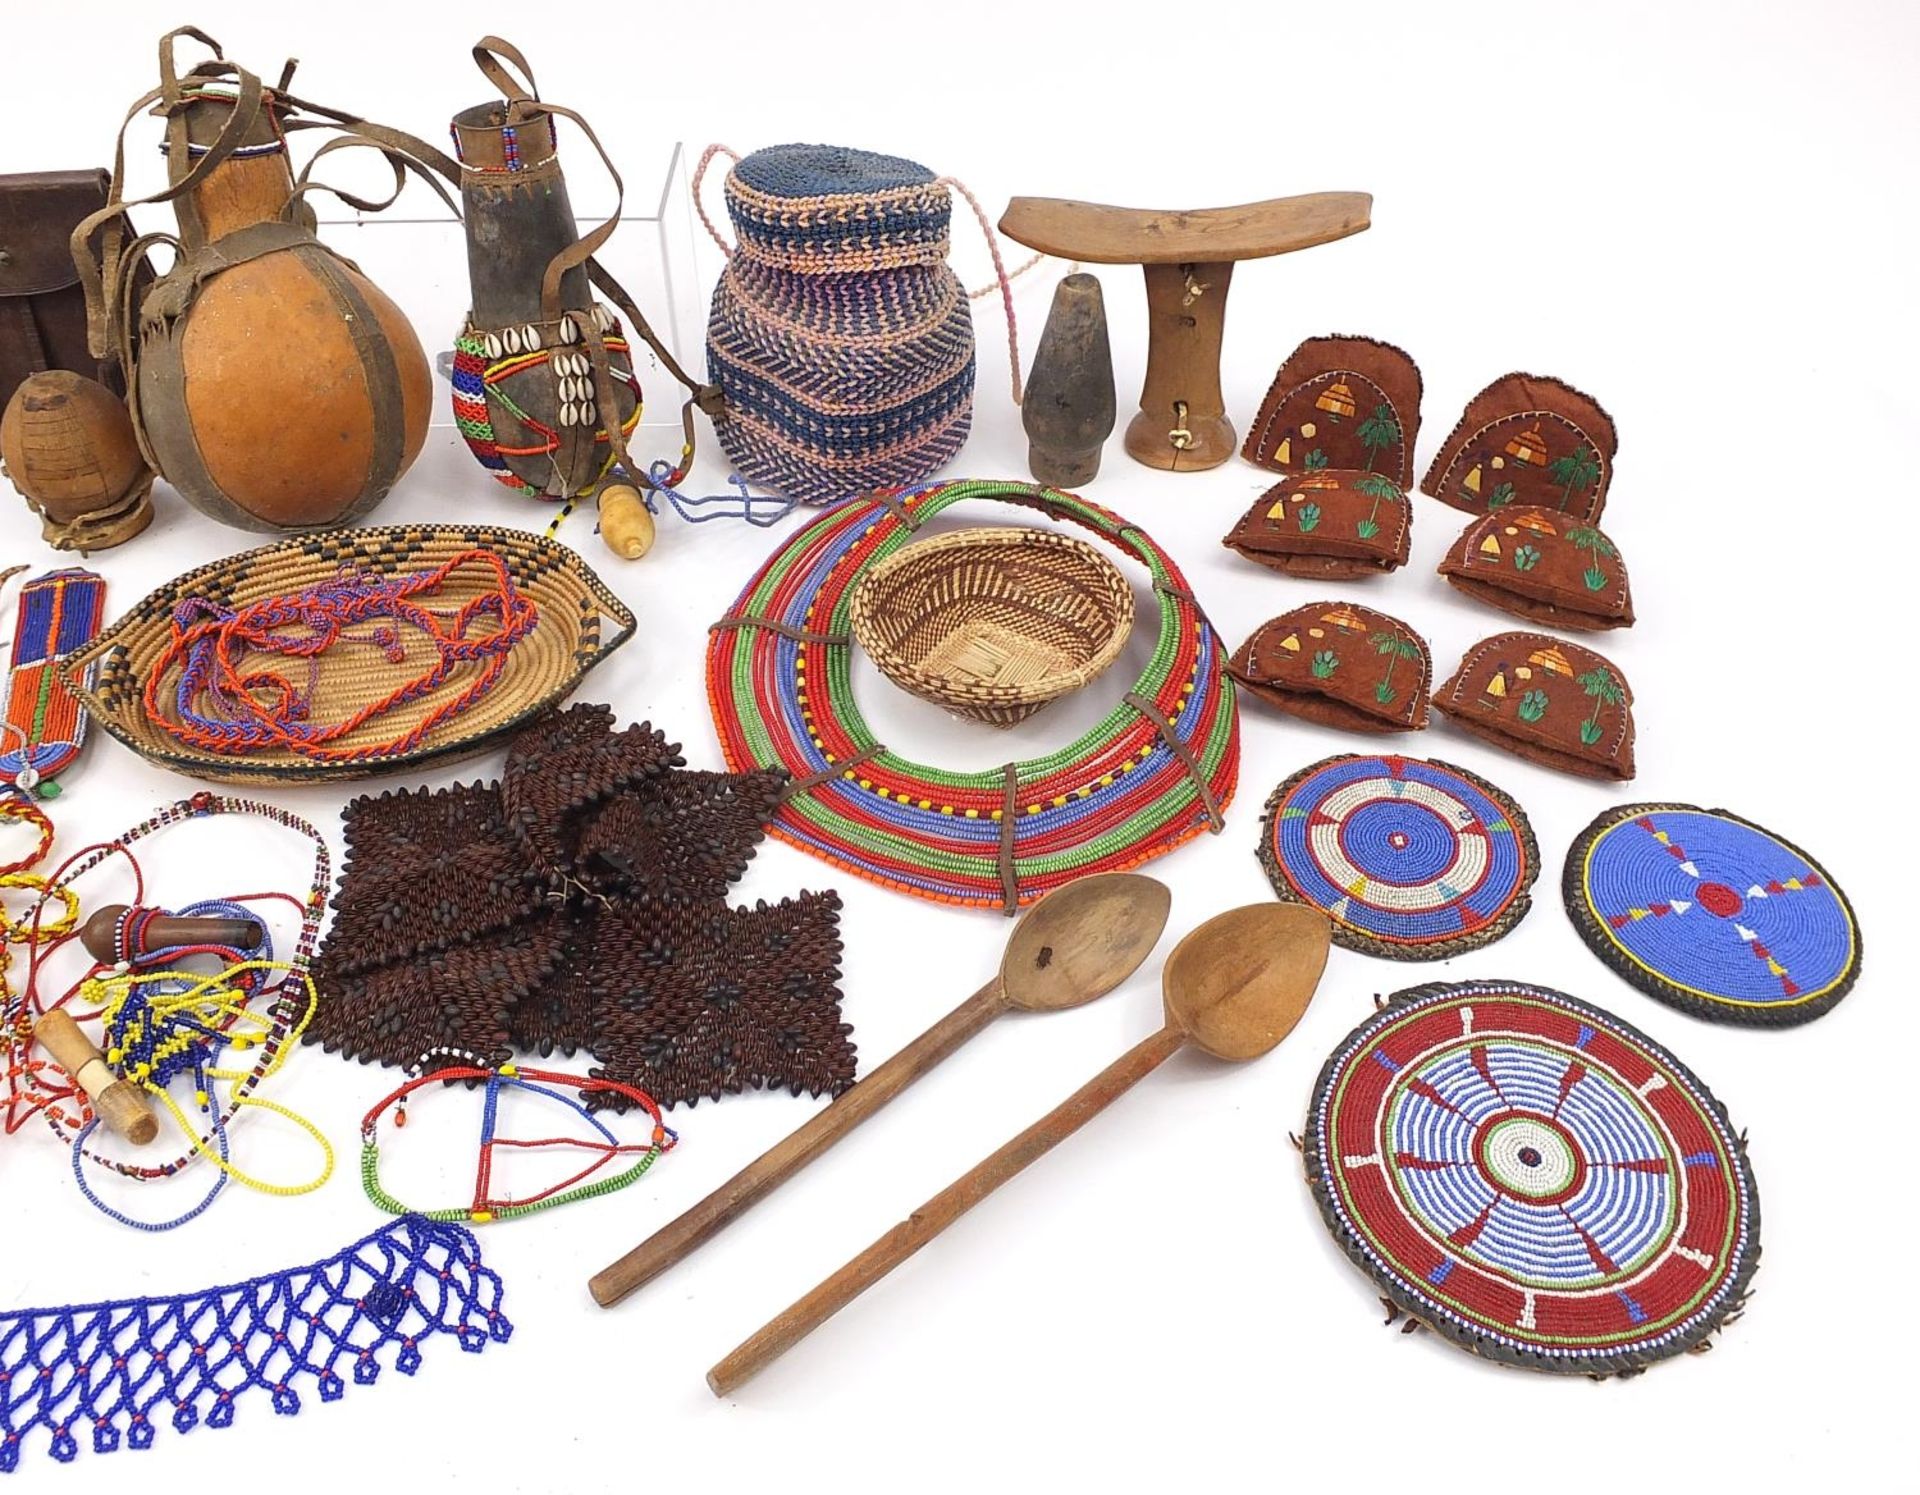 Tribal interest items including a carved wood headrest, gourd vessel with beadwork, tie-dye panels - Image 4 of 5